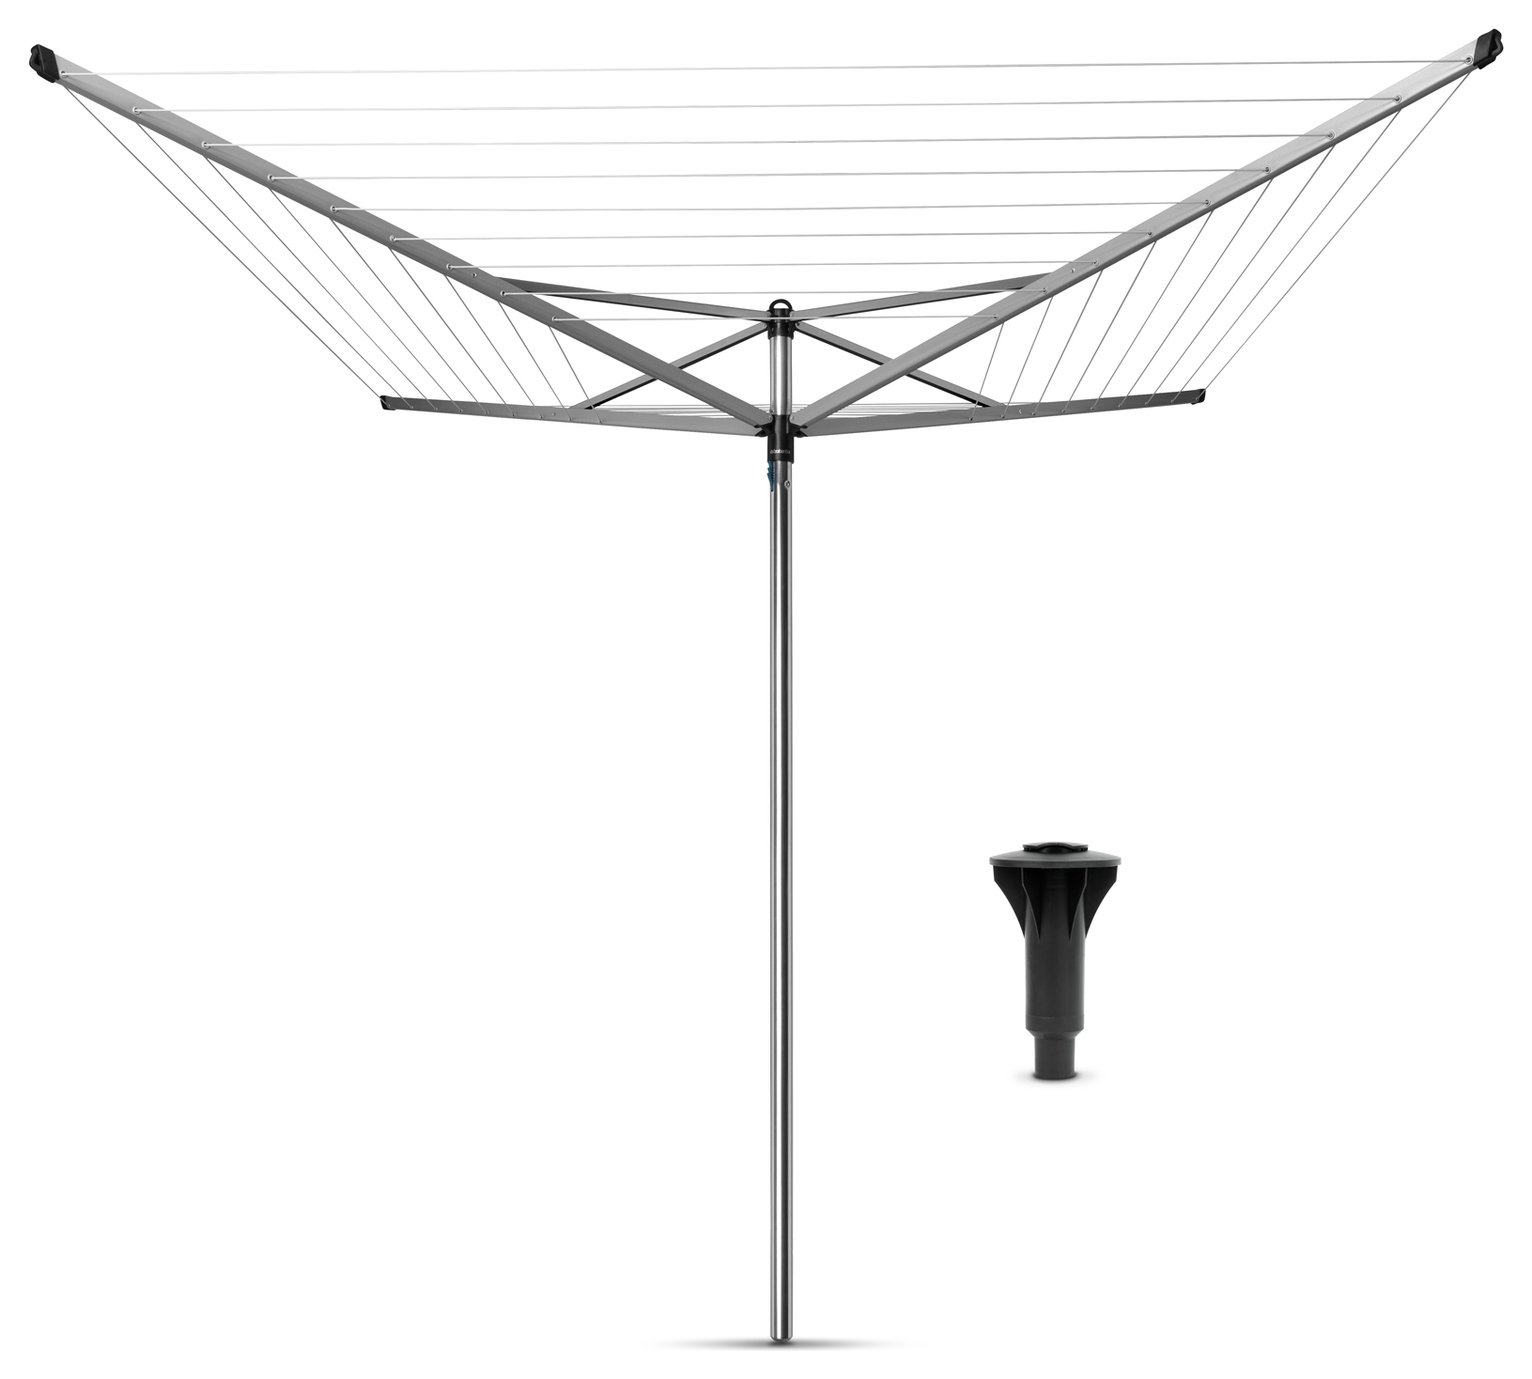 Brabantia Topspinner 40m 4 Arm Rotary Airer with Ground Tube